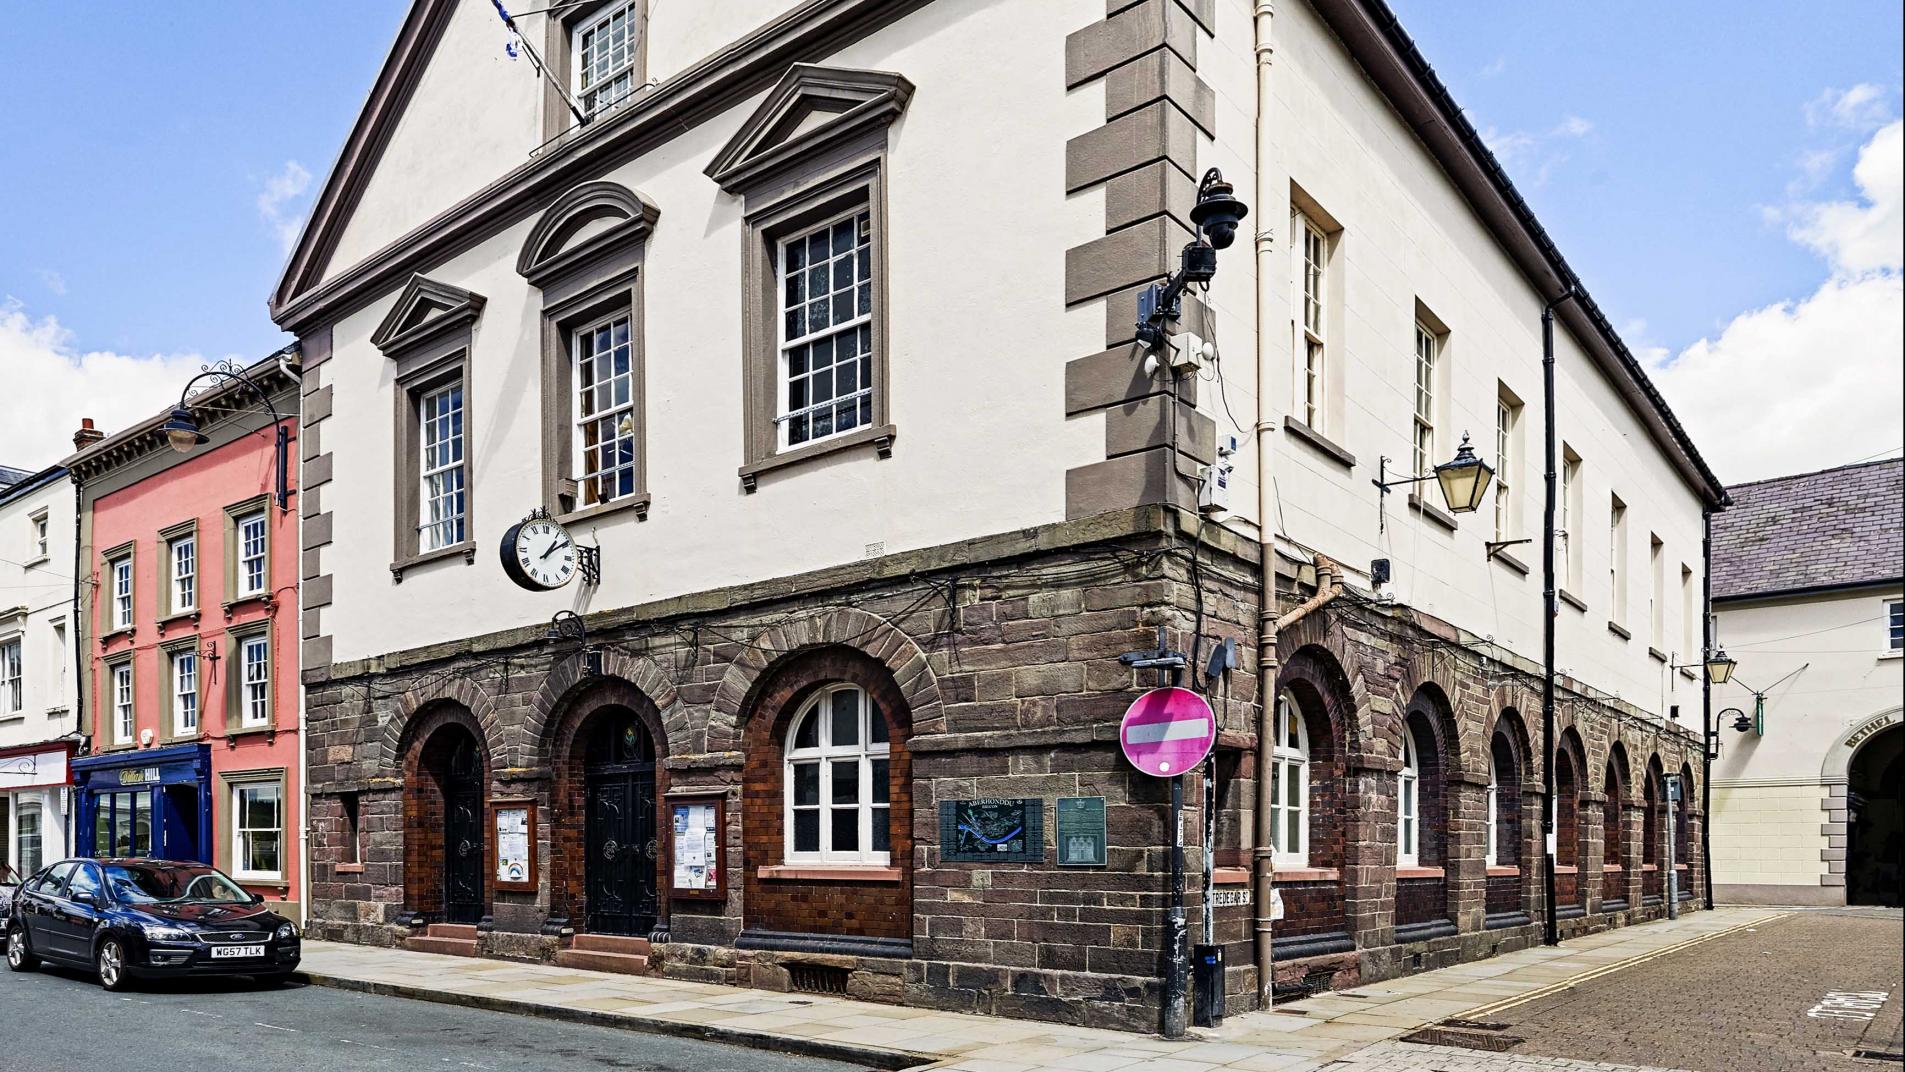 Brecon Guildhall